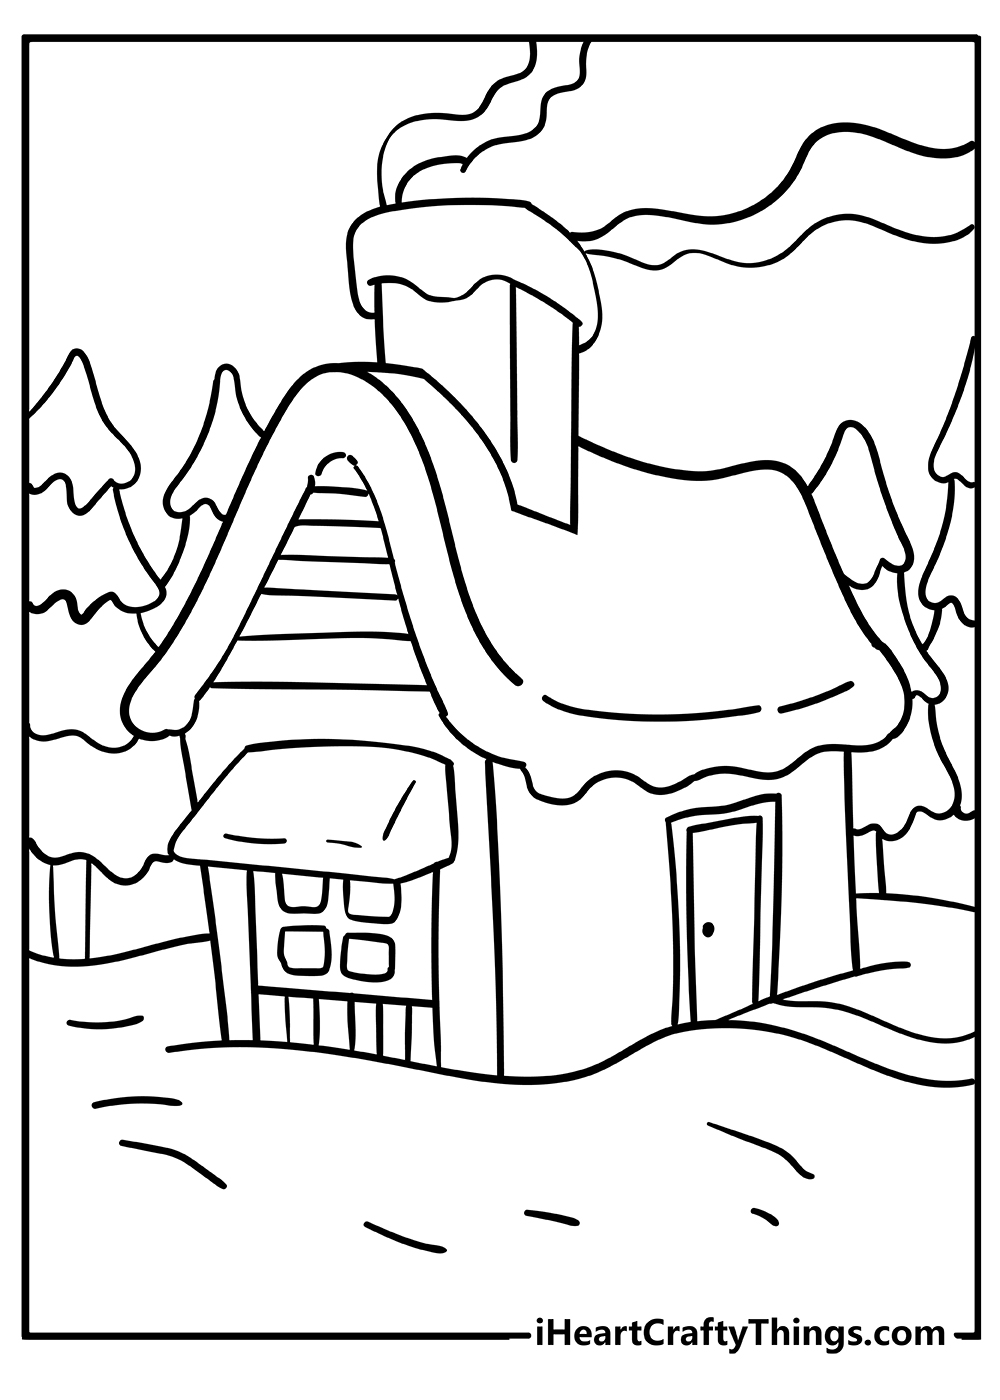 House Coloring Original Sheet for children free download